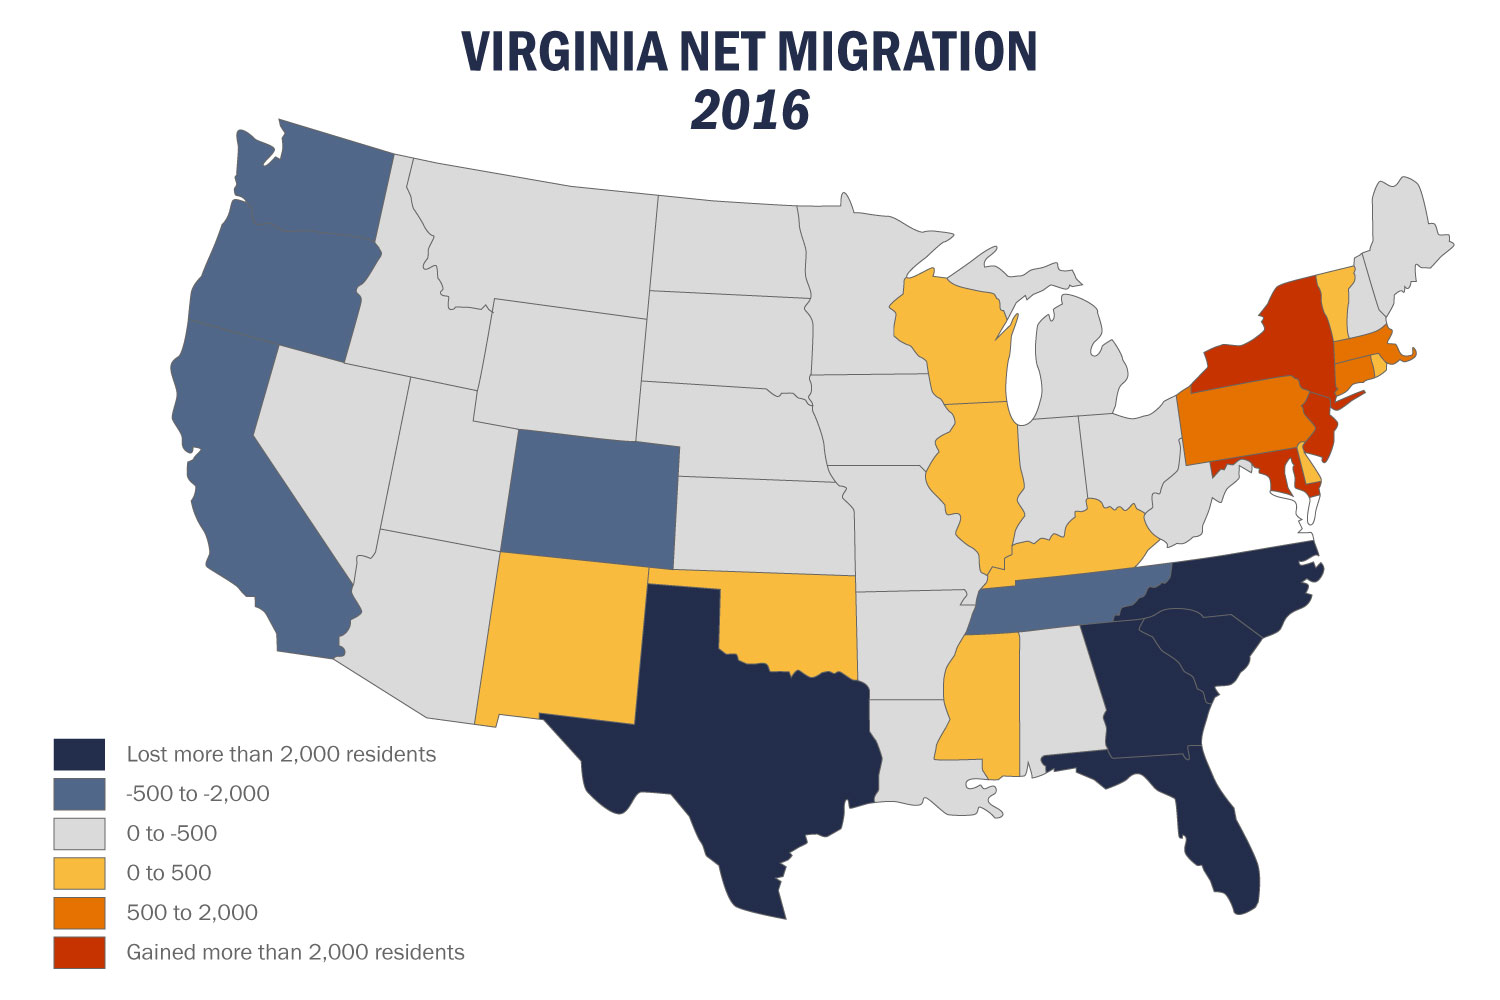 Internal Revenue Service 2015-2016 Migration Flows Data. Red-orange-yellow states lost residents to Virginia while blue states gained residents from Virginia.